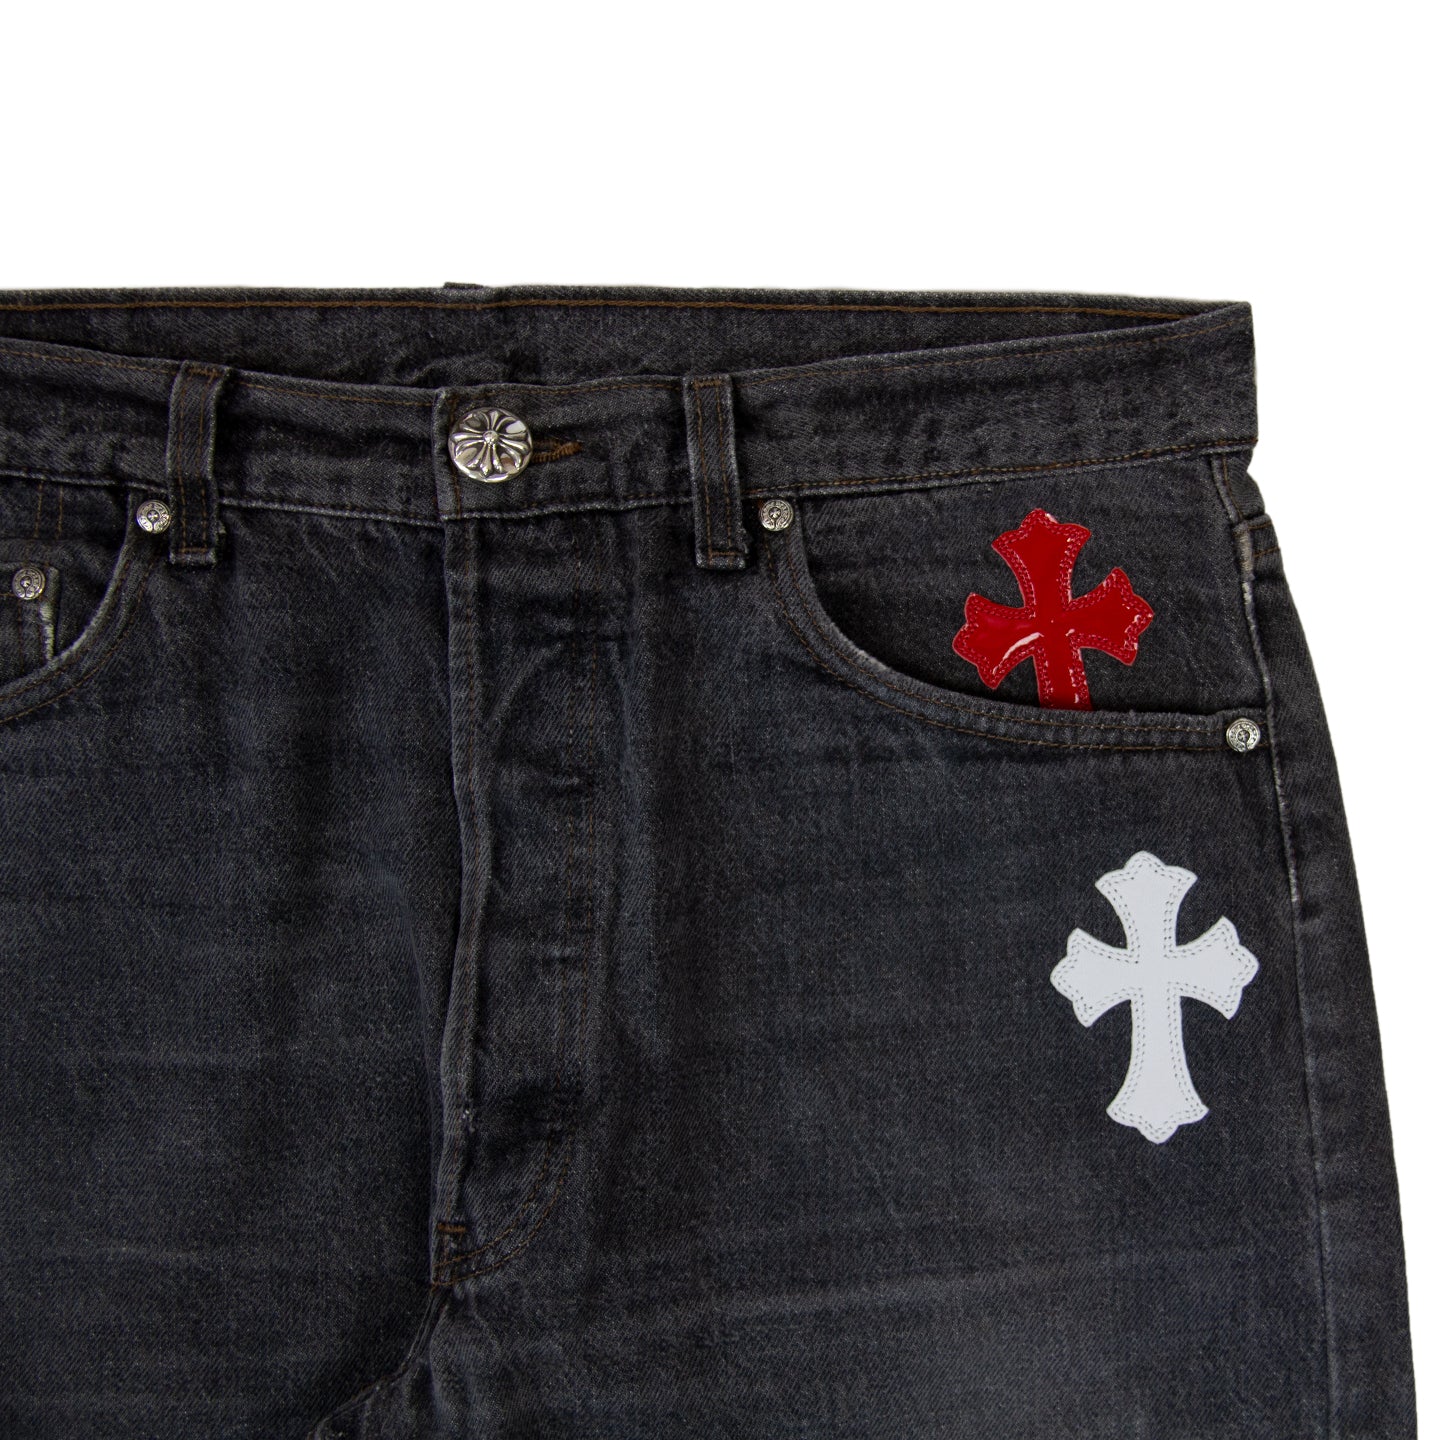 CHROME HEARTS BLACK JEANS IN LIGTH BLUE RED YELLOW LEATHER CROSS